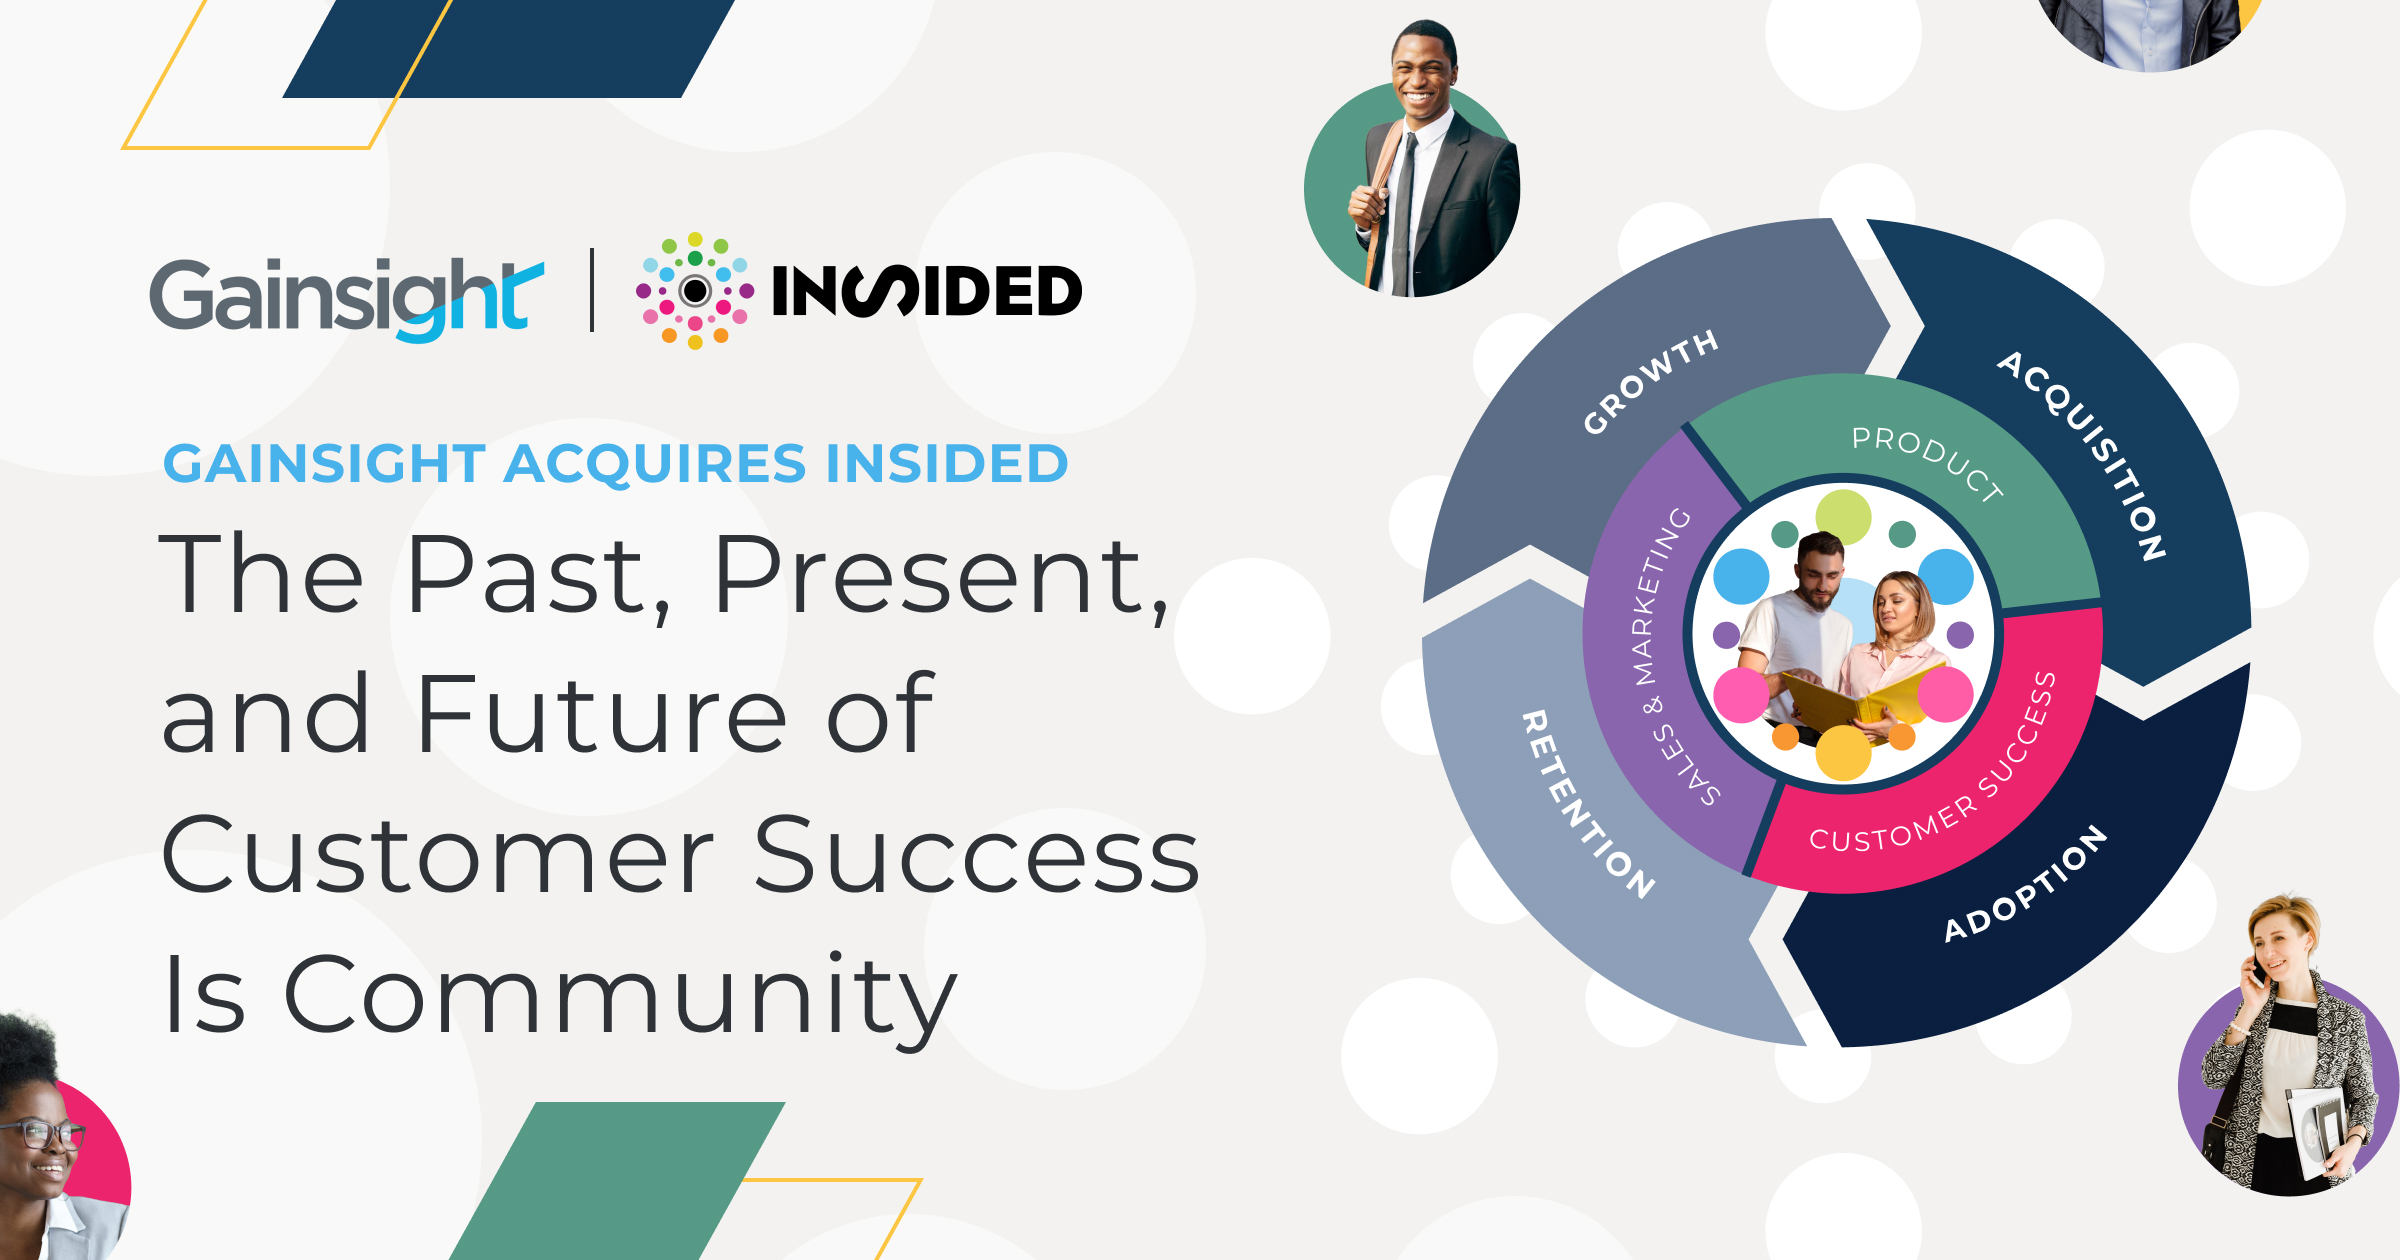 Gainsight Acquires inSided: The Past, Present, and Future of Customer Success Is Community Image